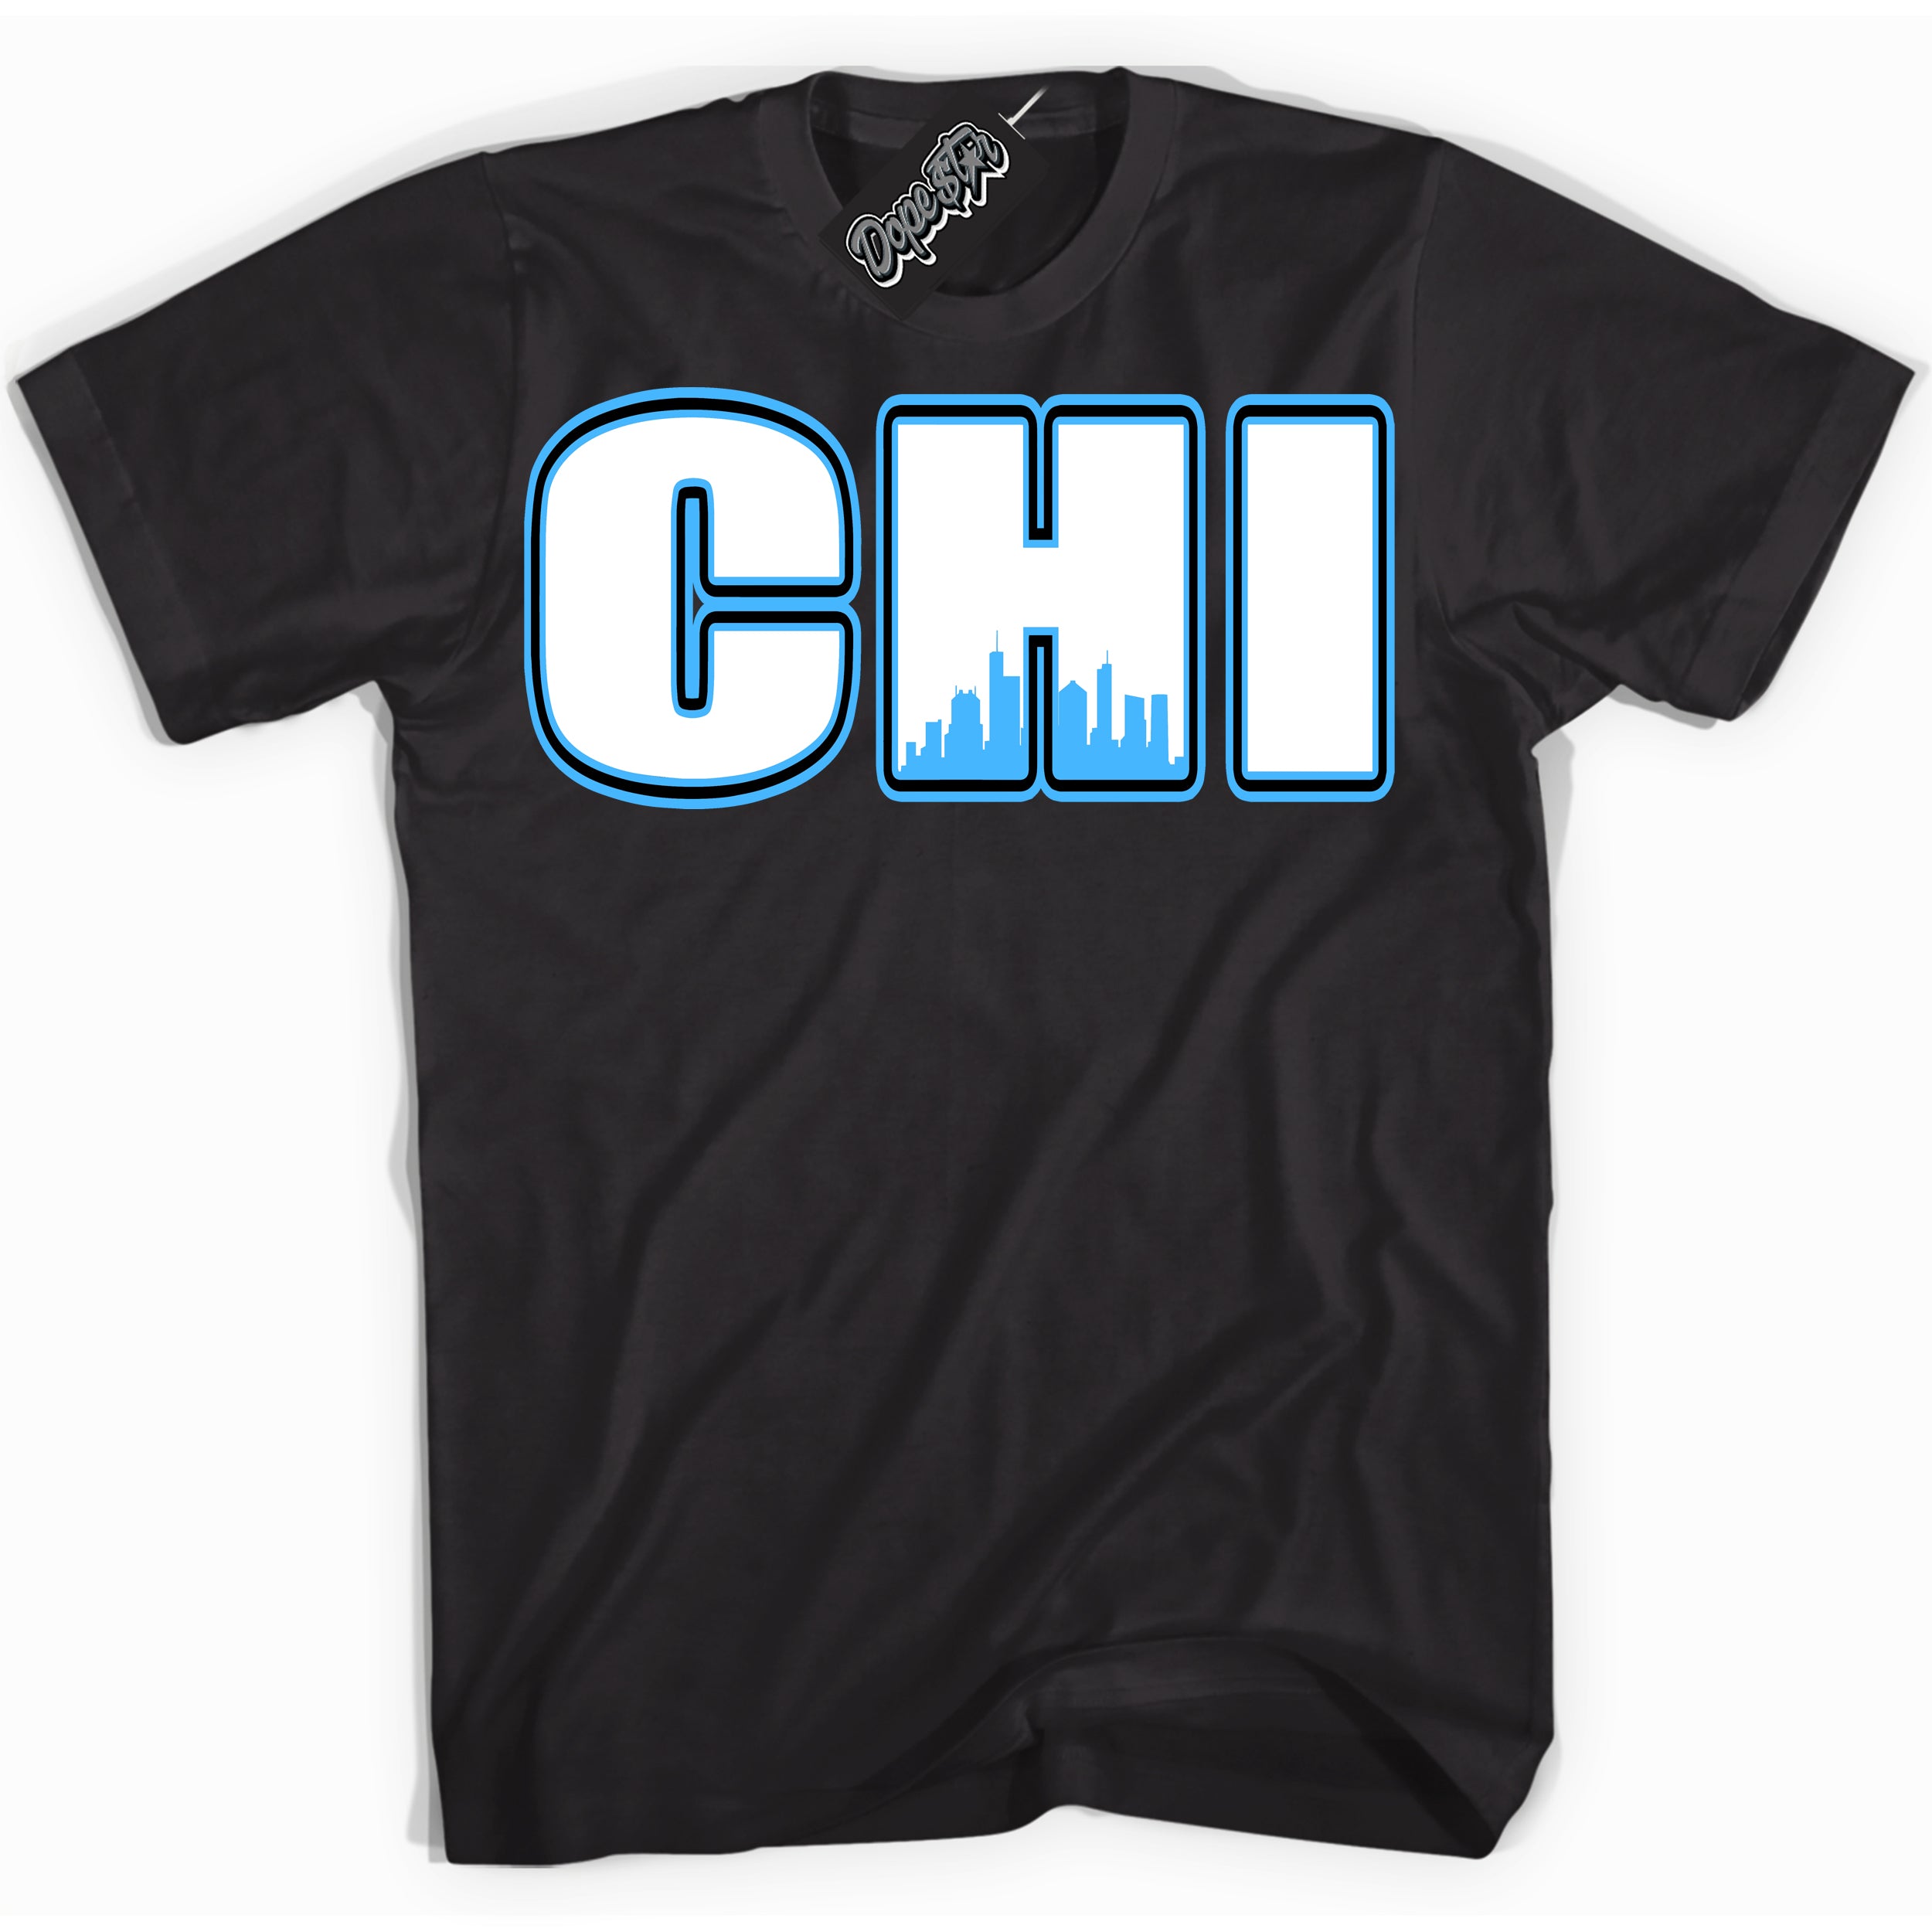 Cool Black graphic tee with “ Chicago ” design, that perfectly matches Powder Blue 9s sneakers 